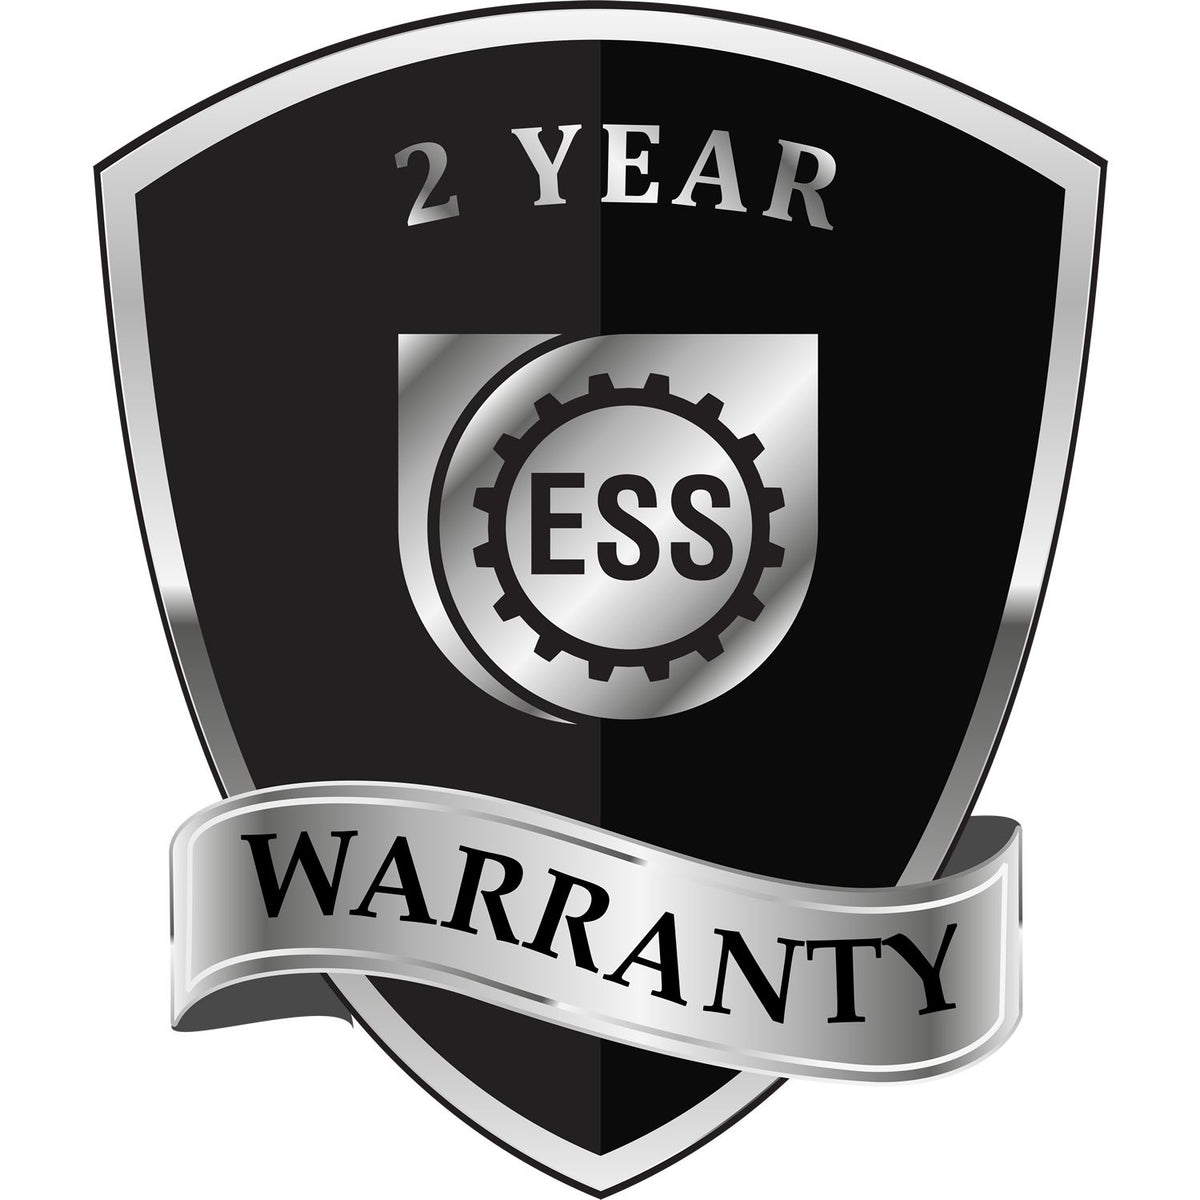 A black and silver badge or emblem showing warranty information for the Handheld Iowa Professional Geologist Embosser